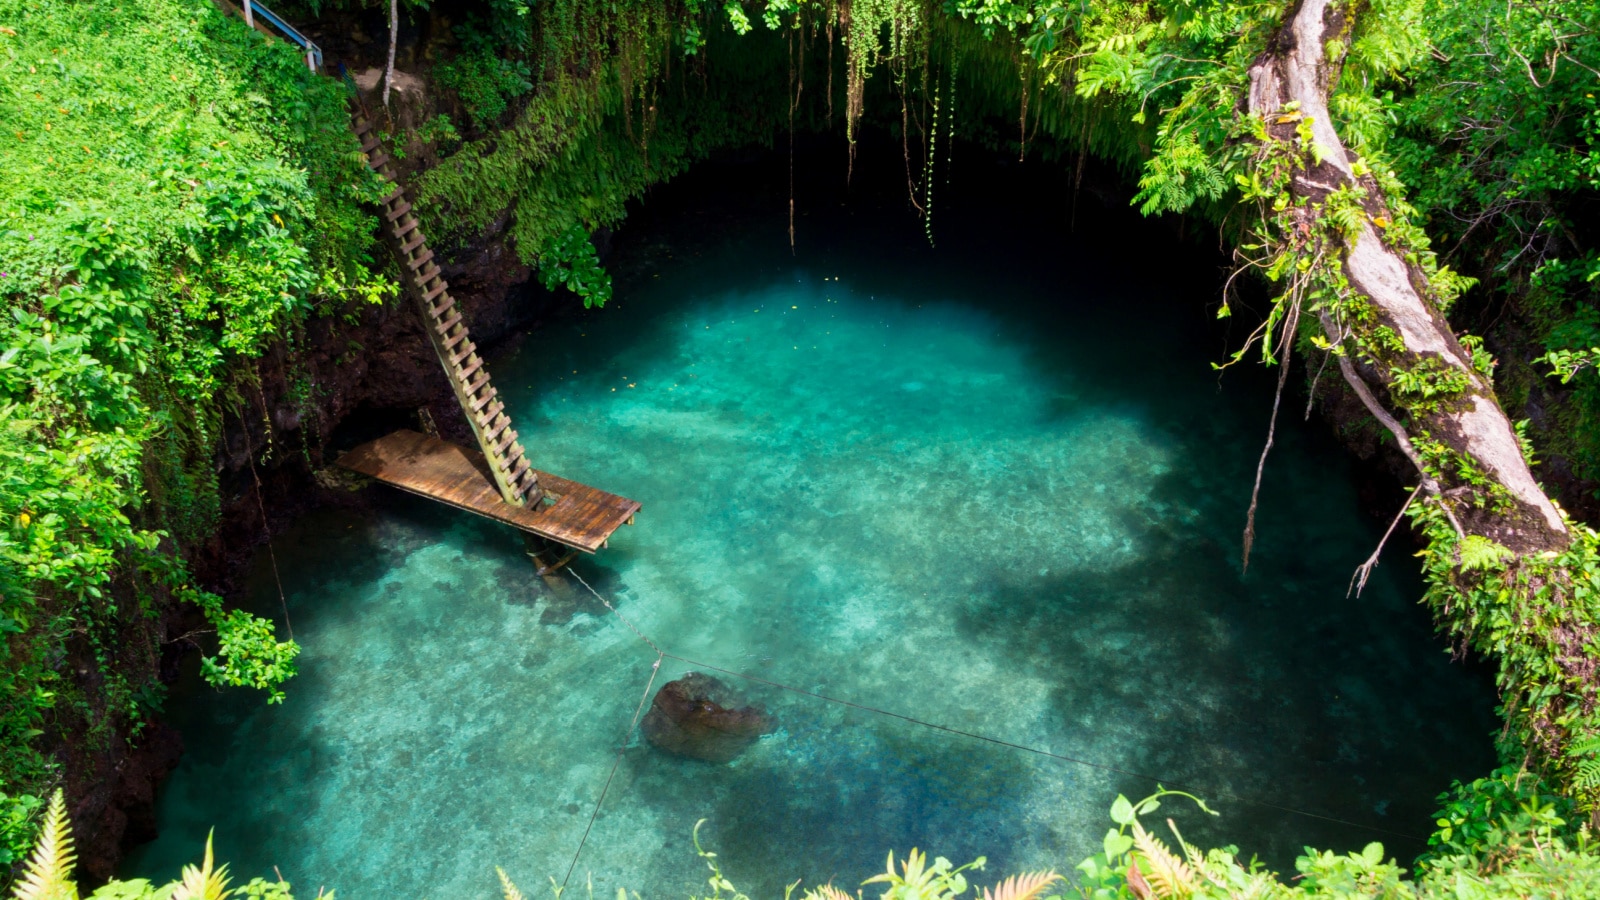 The natural turquoise waters pool of To Sua ocean trench in Lotofaga -Upolo, Samoa